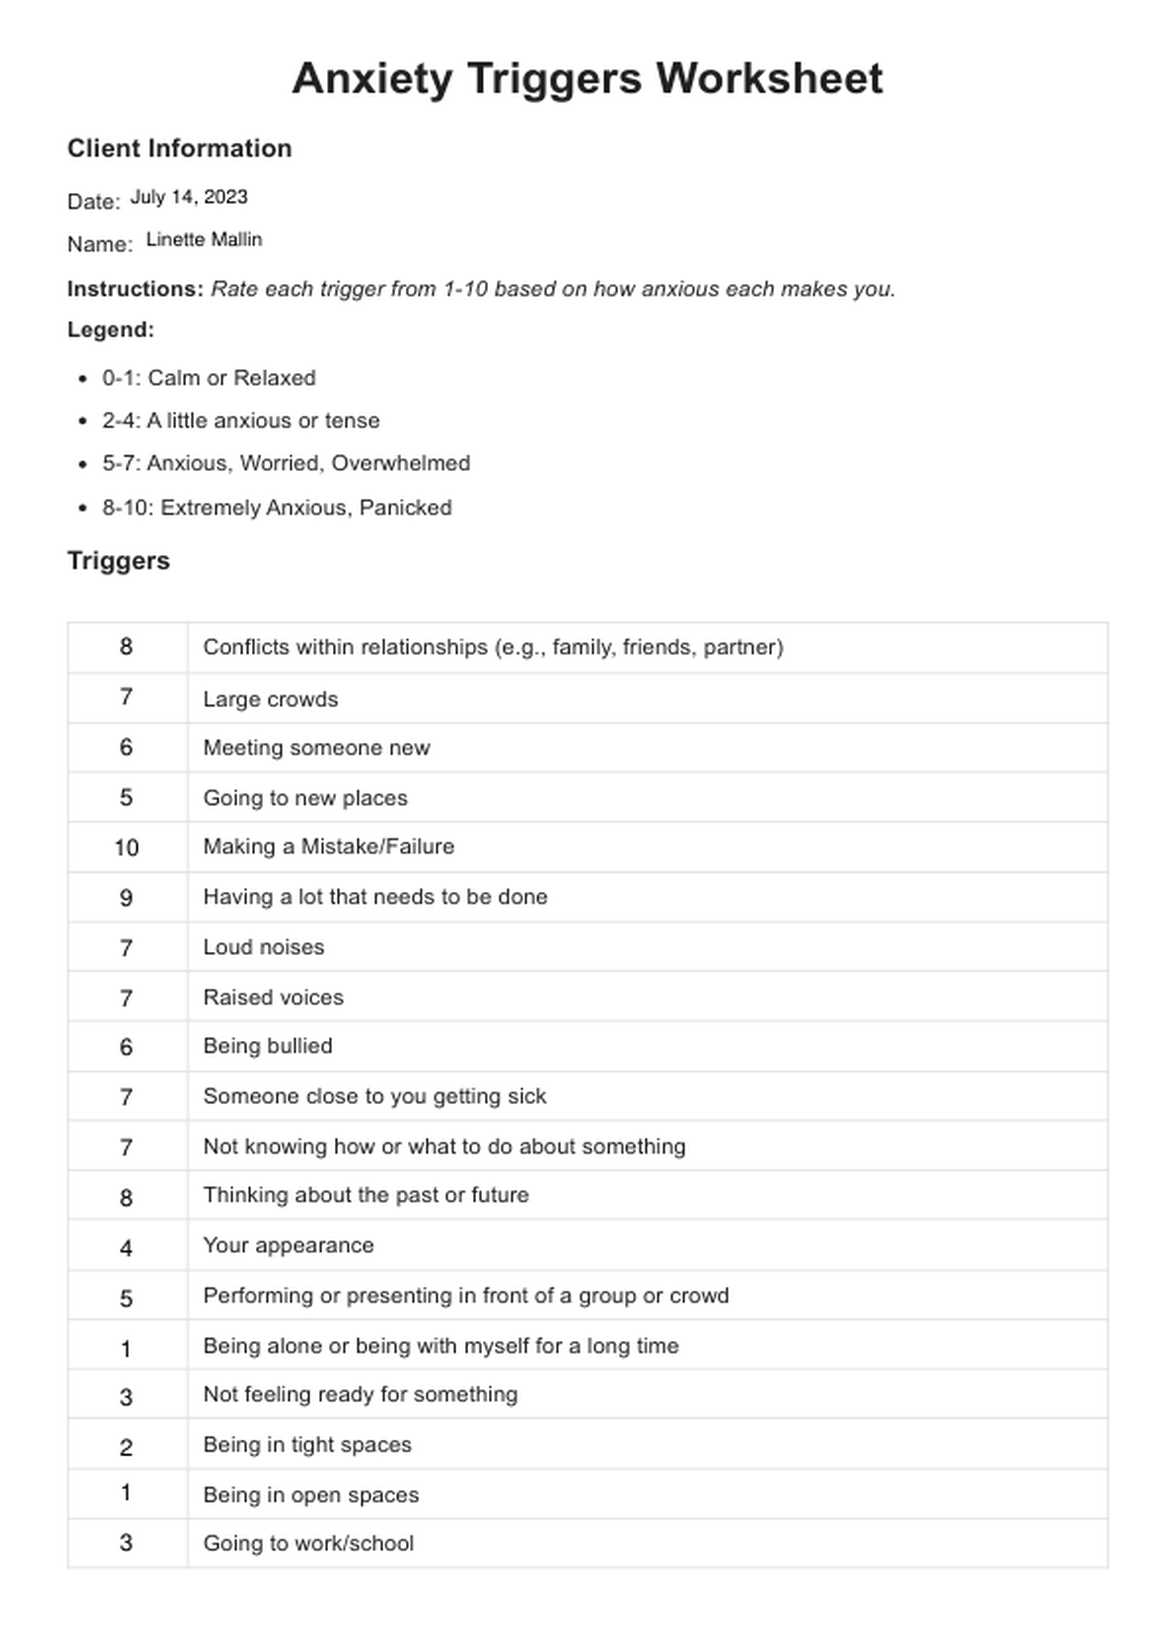 Anxiety Triggers Worksheet PDF Example